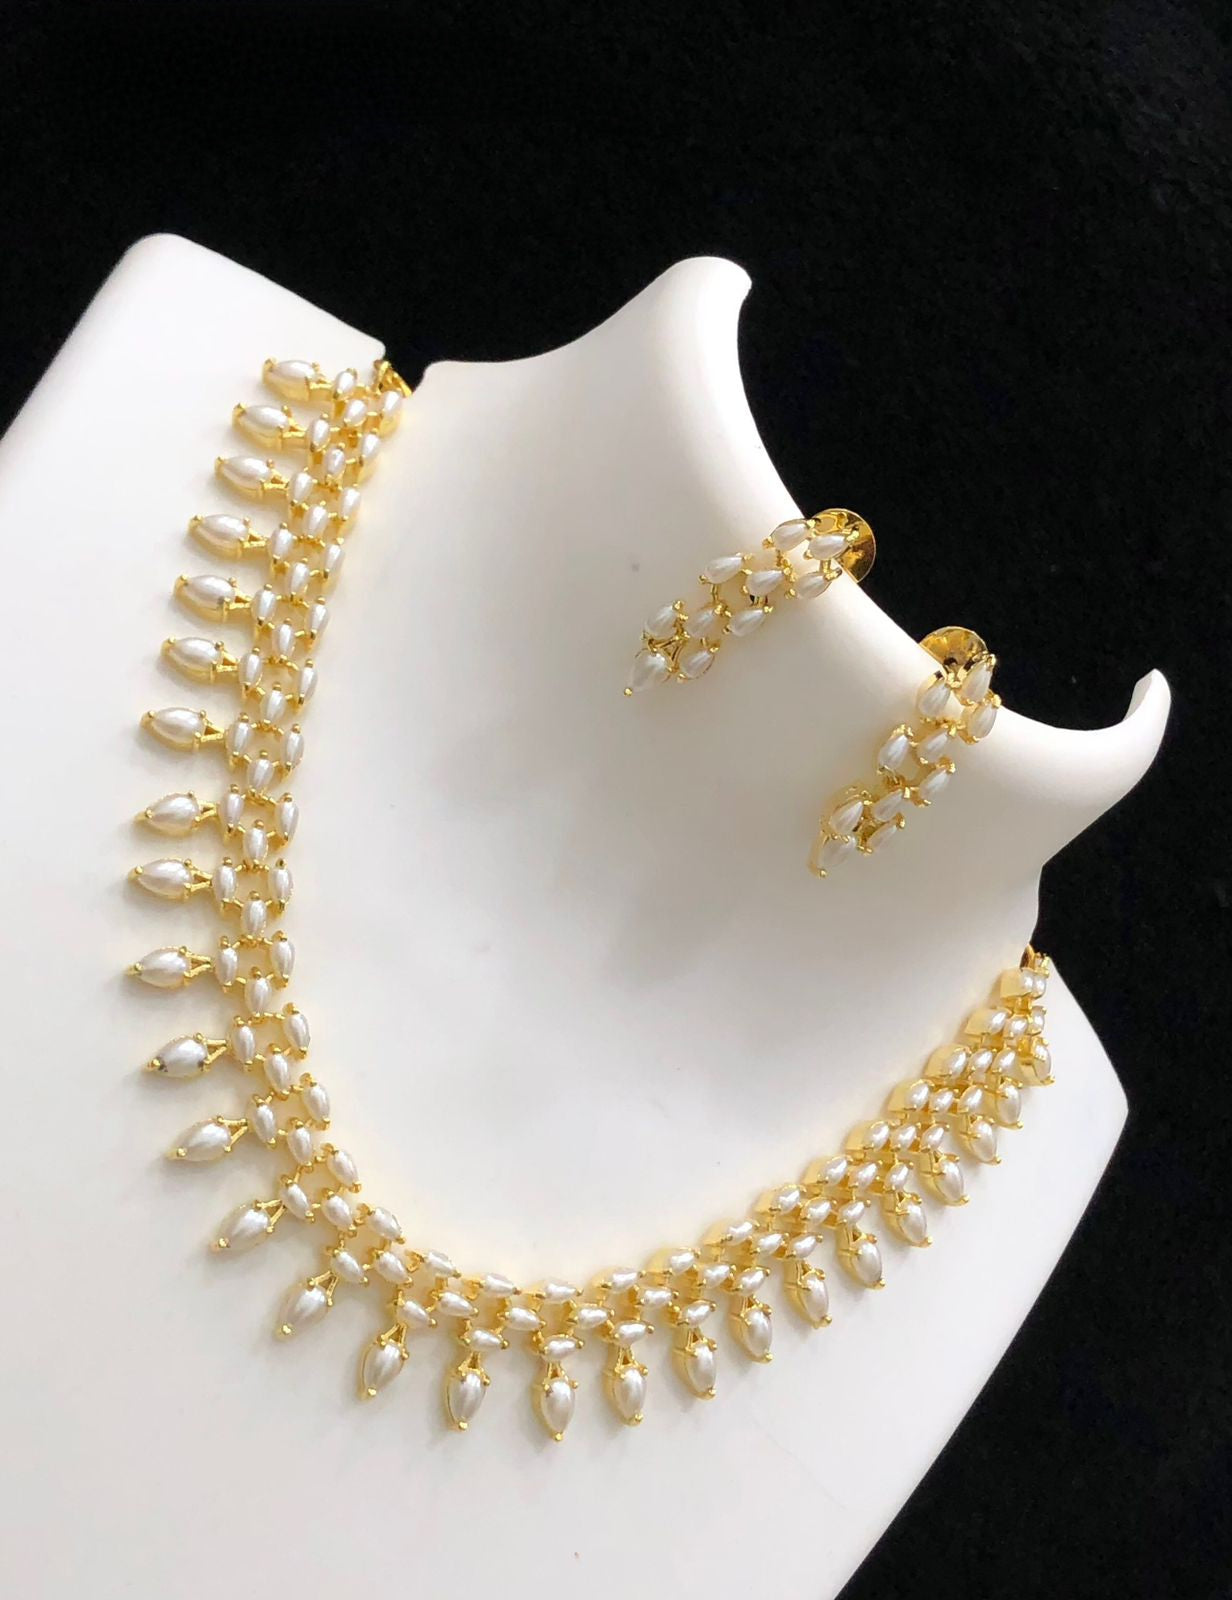 Gold Plated simple Daily wear American Diamond Pearl Choker necklace Earring set, Pearl and Crystal choker, South Indian Jewelry Gold choker